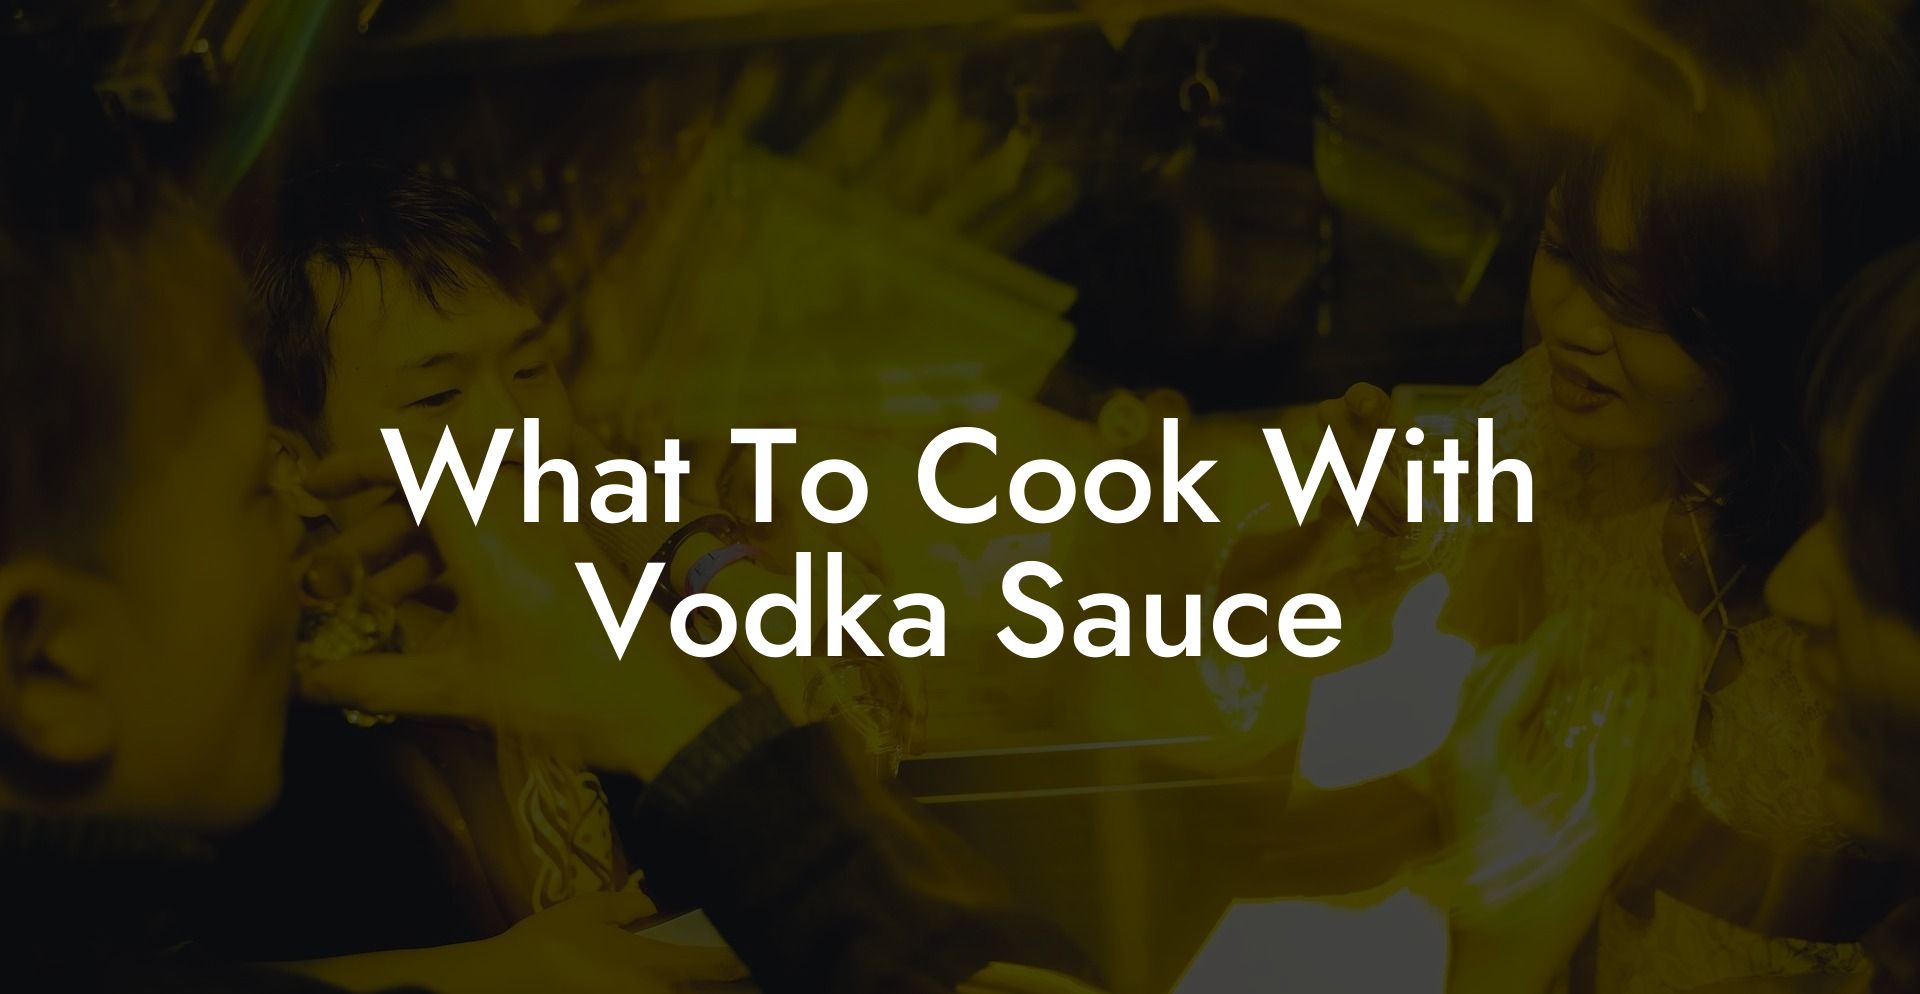 What To Cook With Vodka Sauce